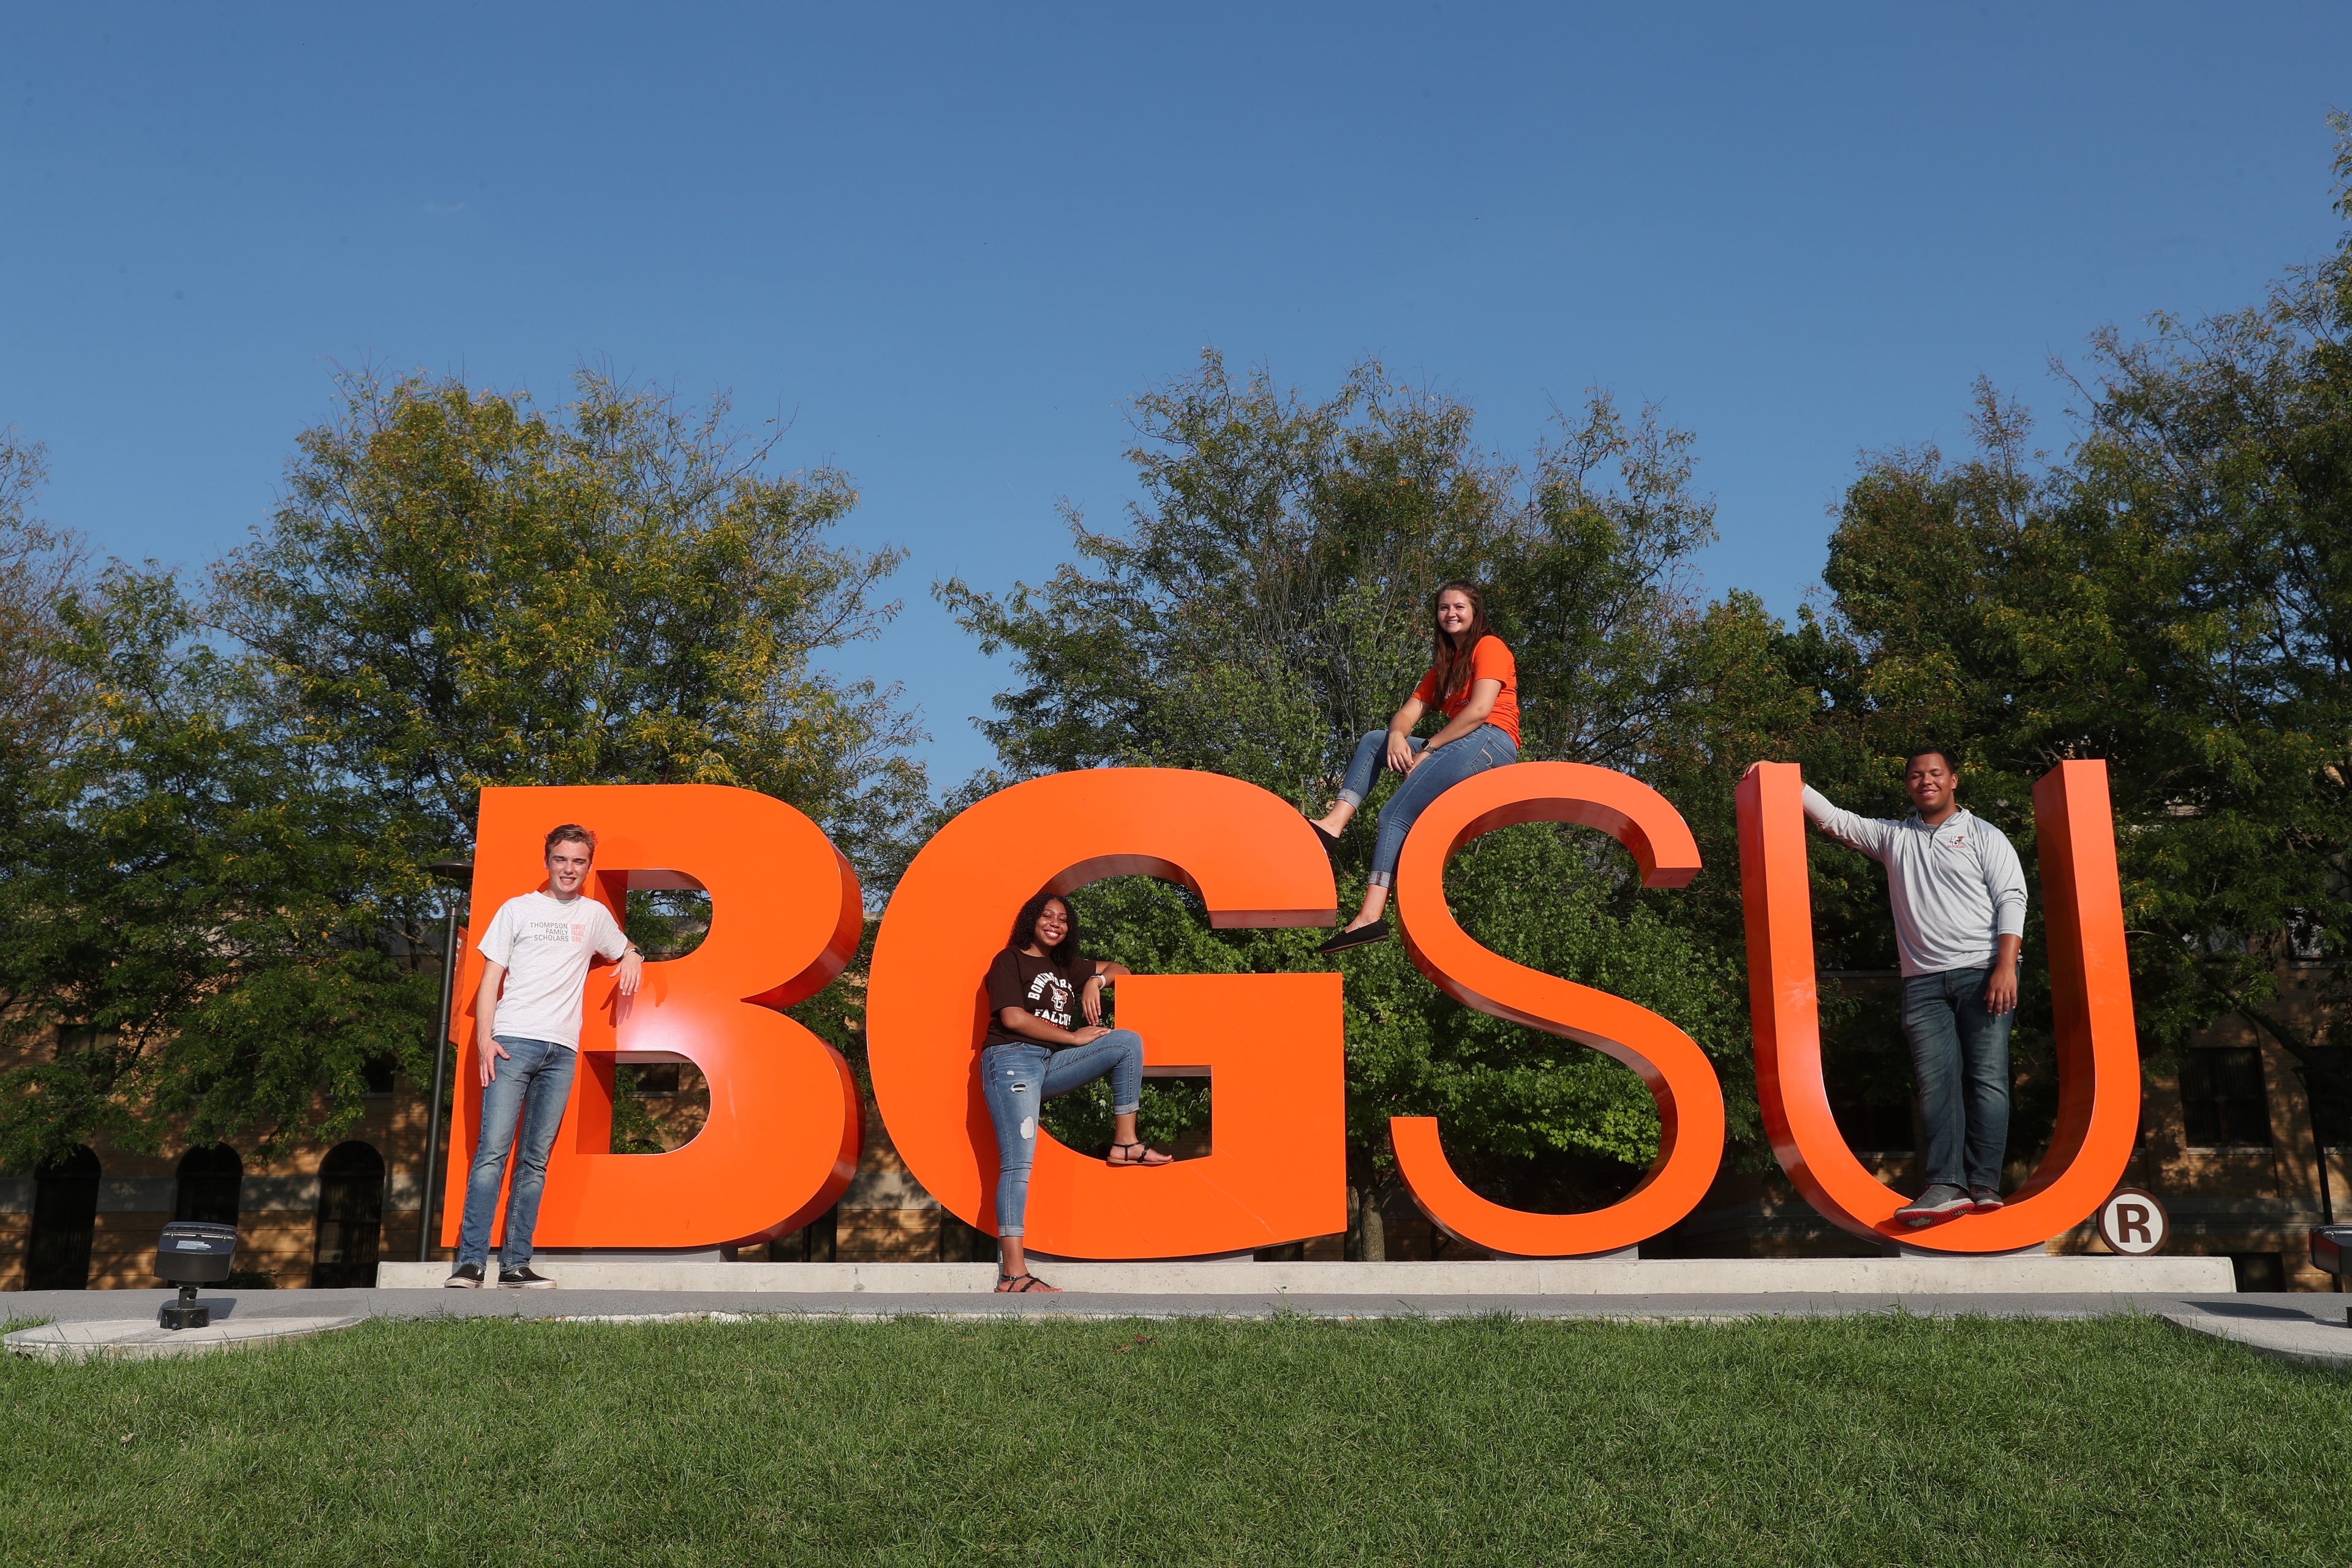 Students sitting on the BGSU letters